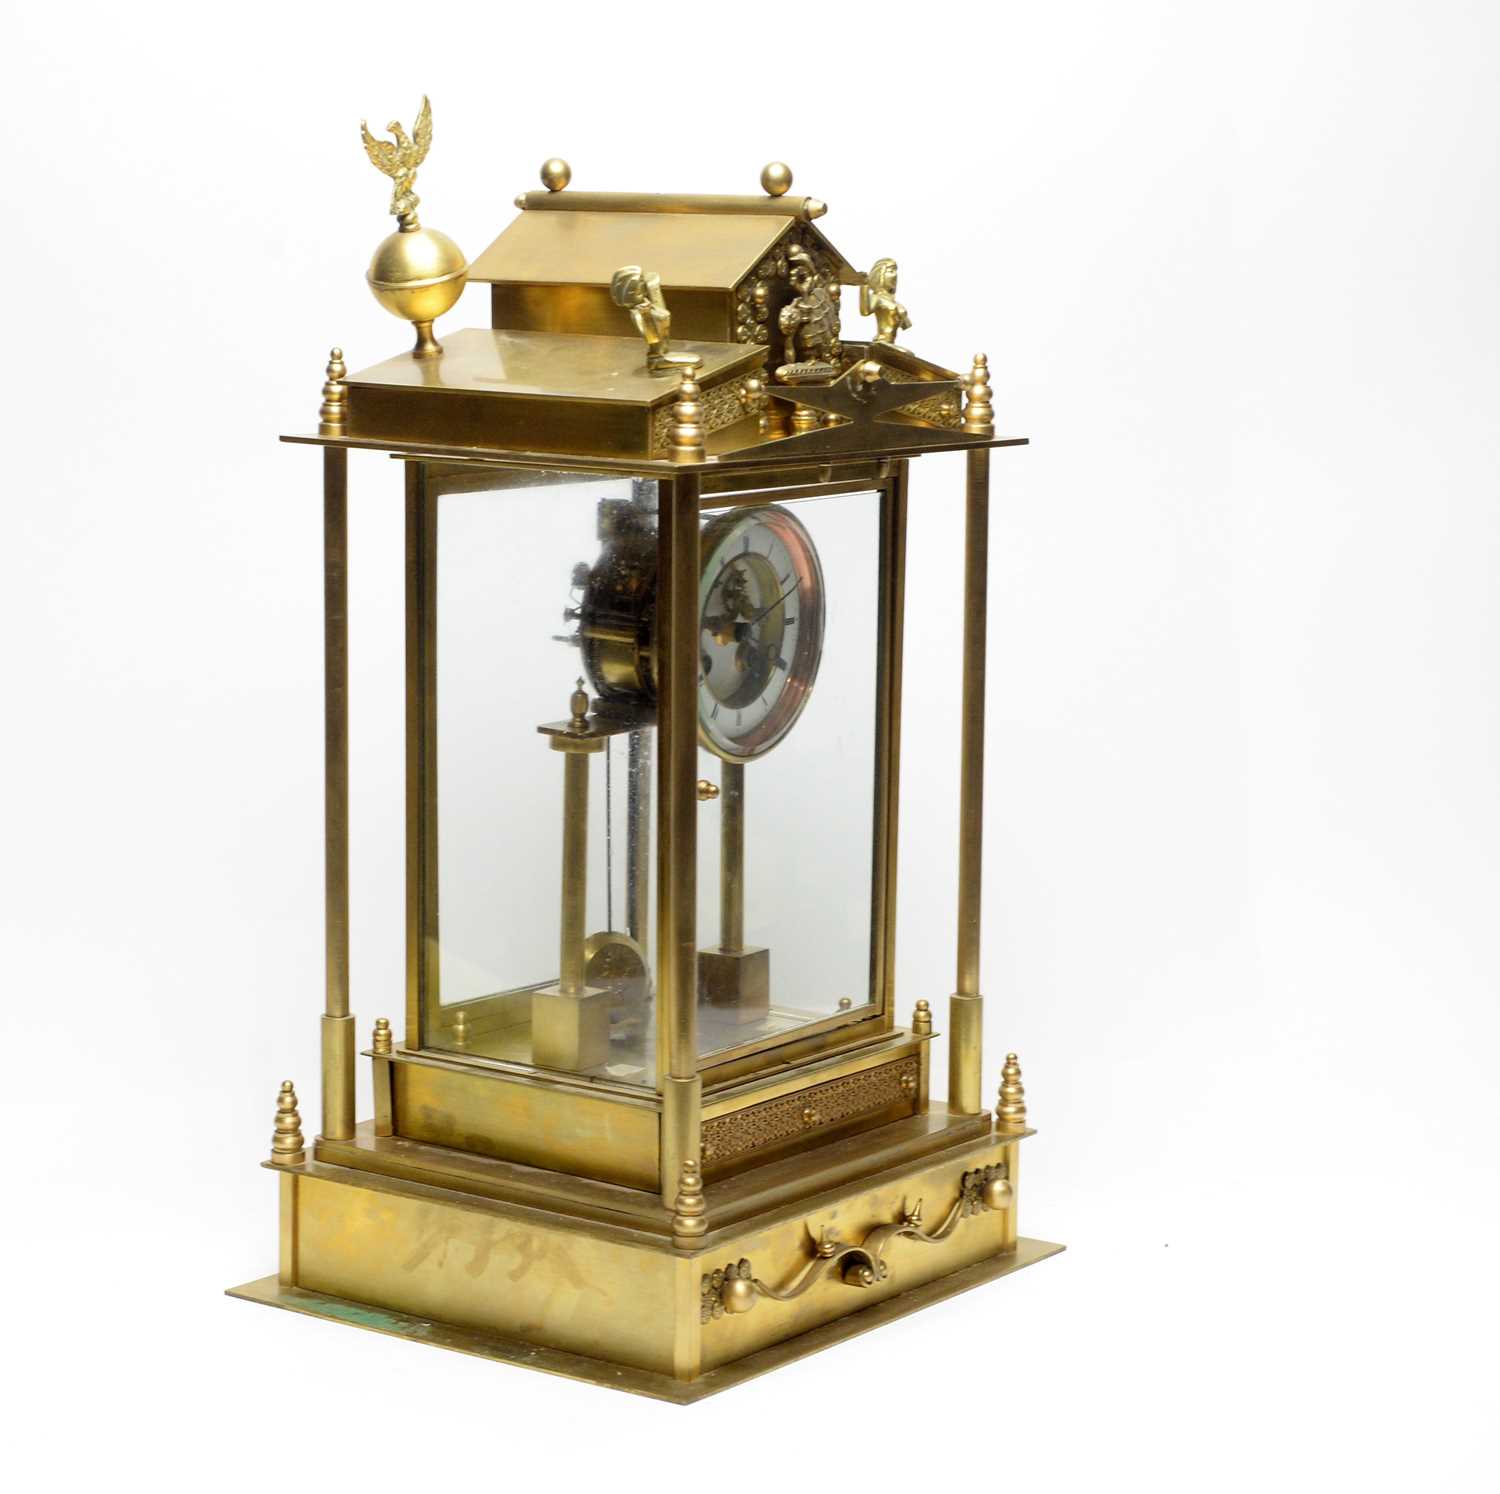 S Marti & Cie: a large and impressive French gilt four-glass mantel clock - Image 13 of 15